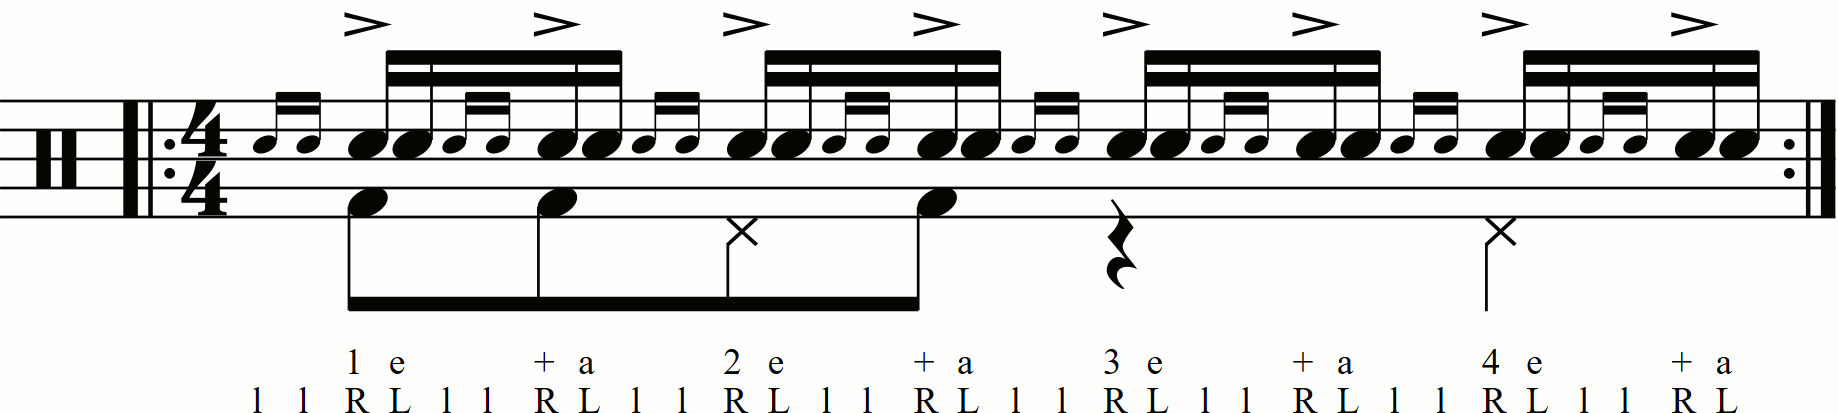 Applying level 0 groove movements on the feet under a Drag Tap